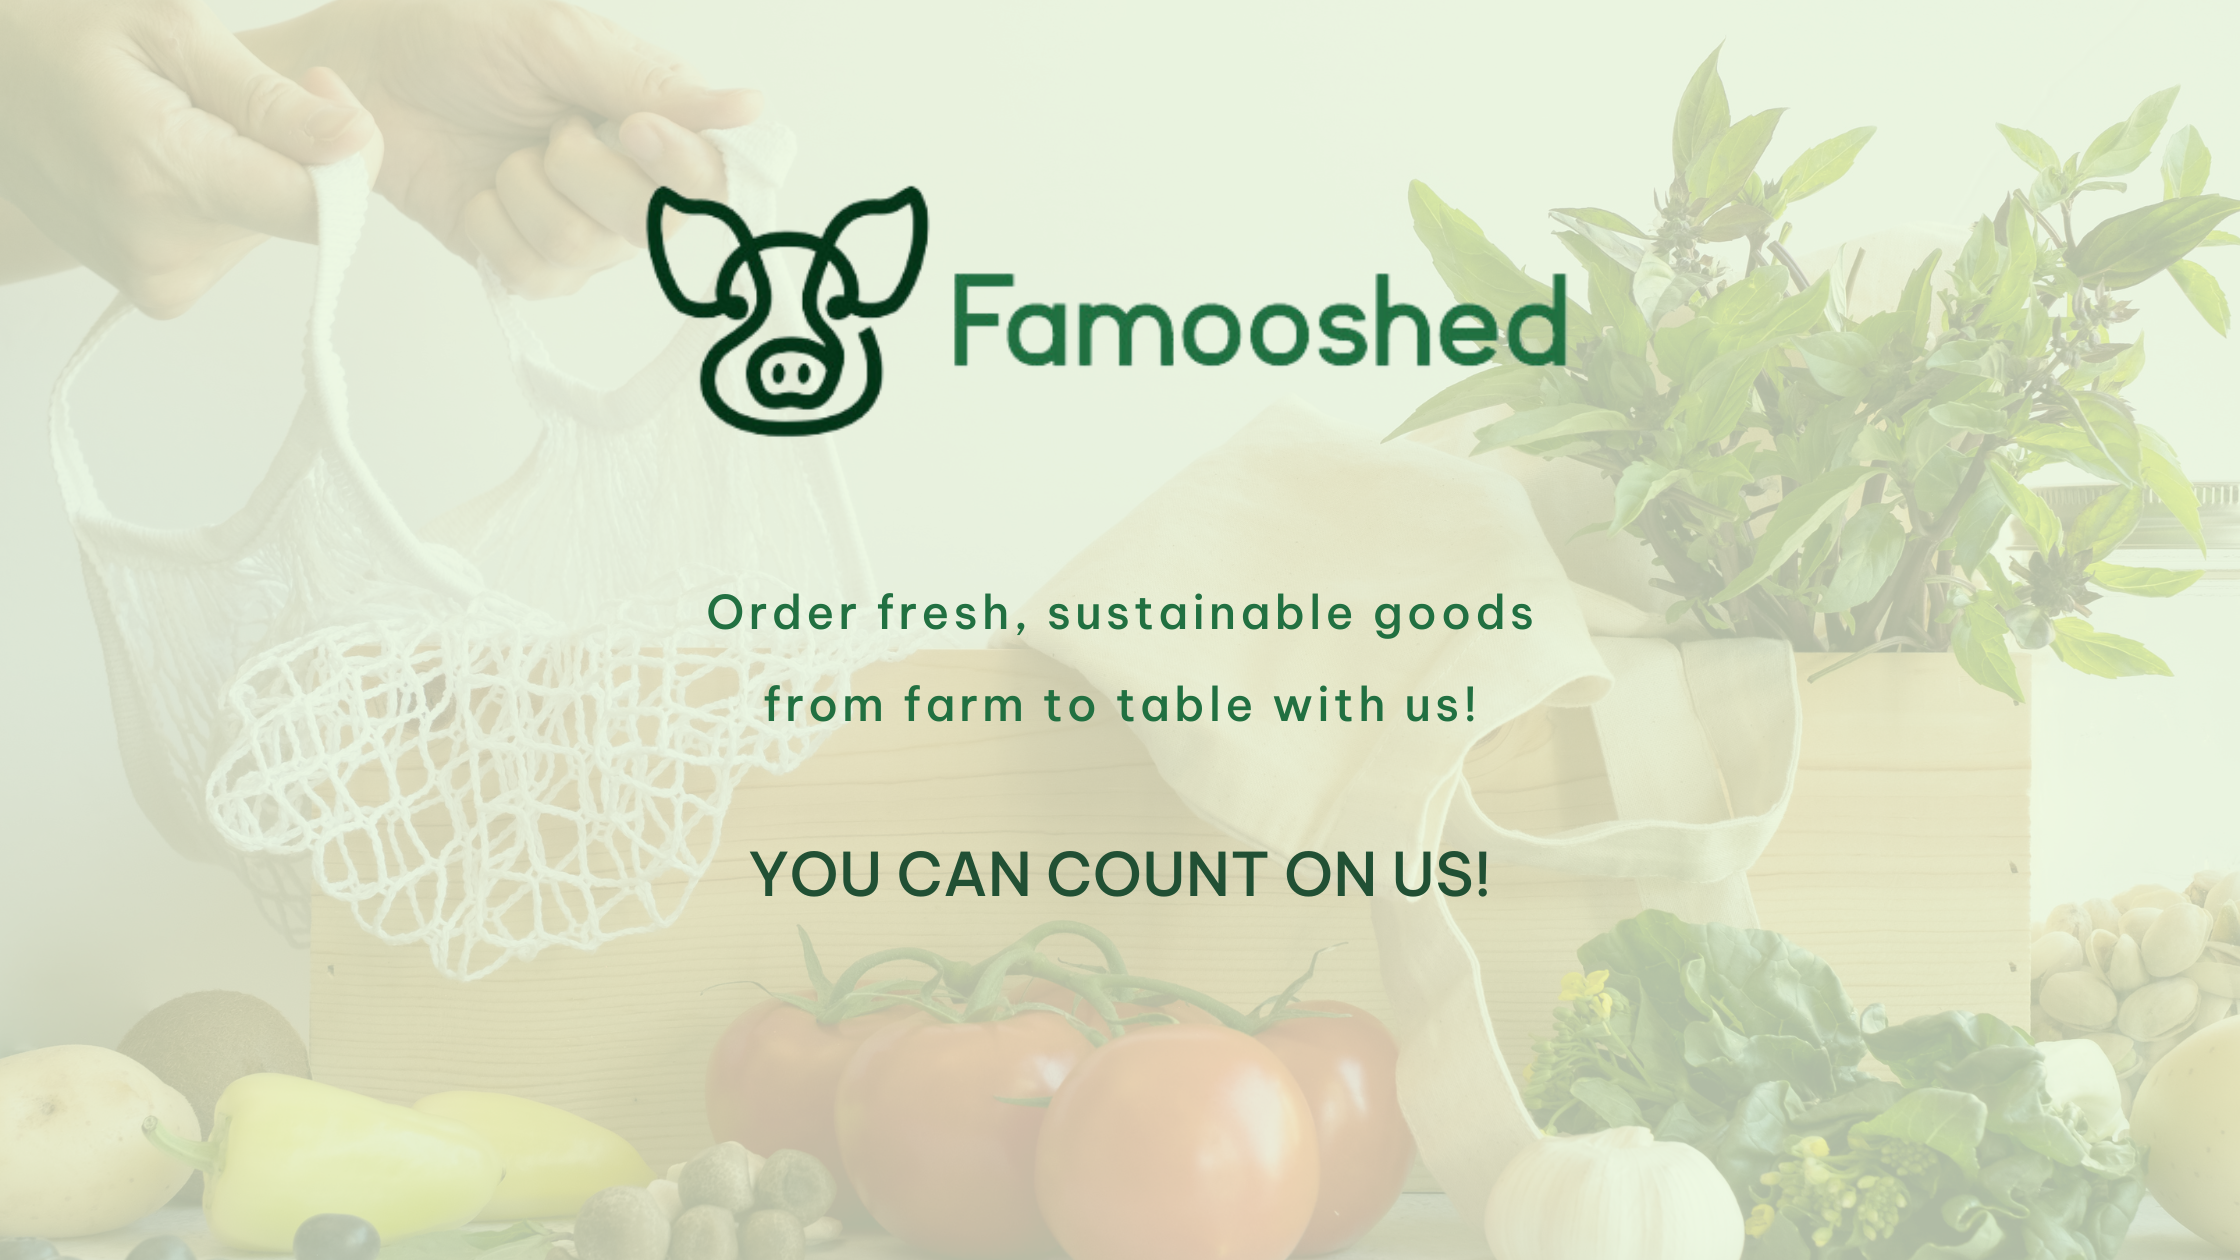 Choose Famooshed for an Enhanced Shopping Experience!